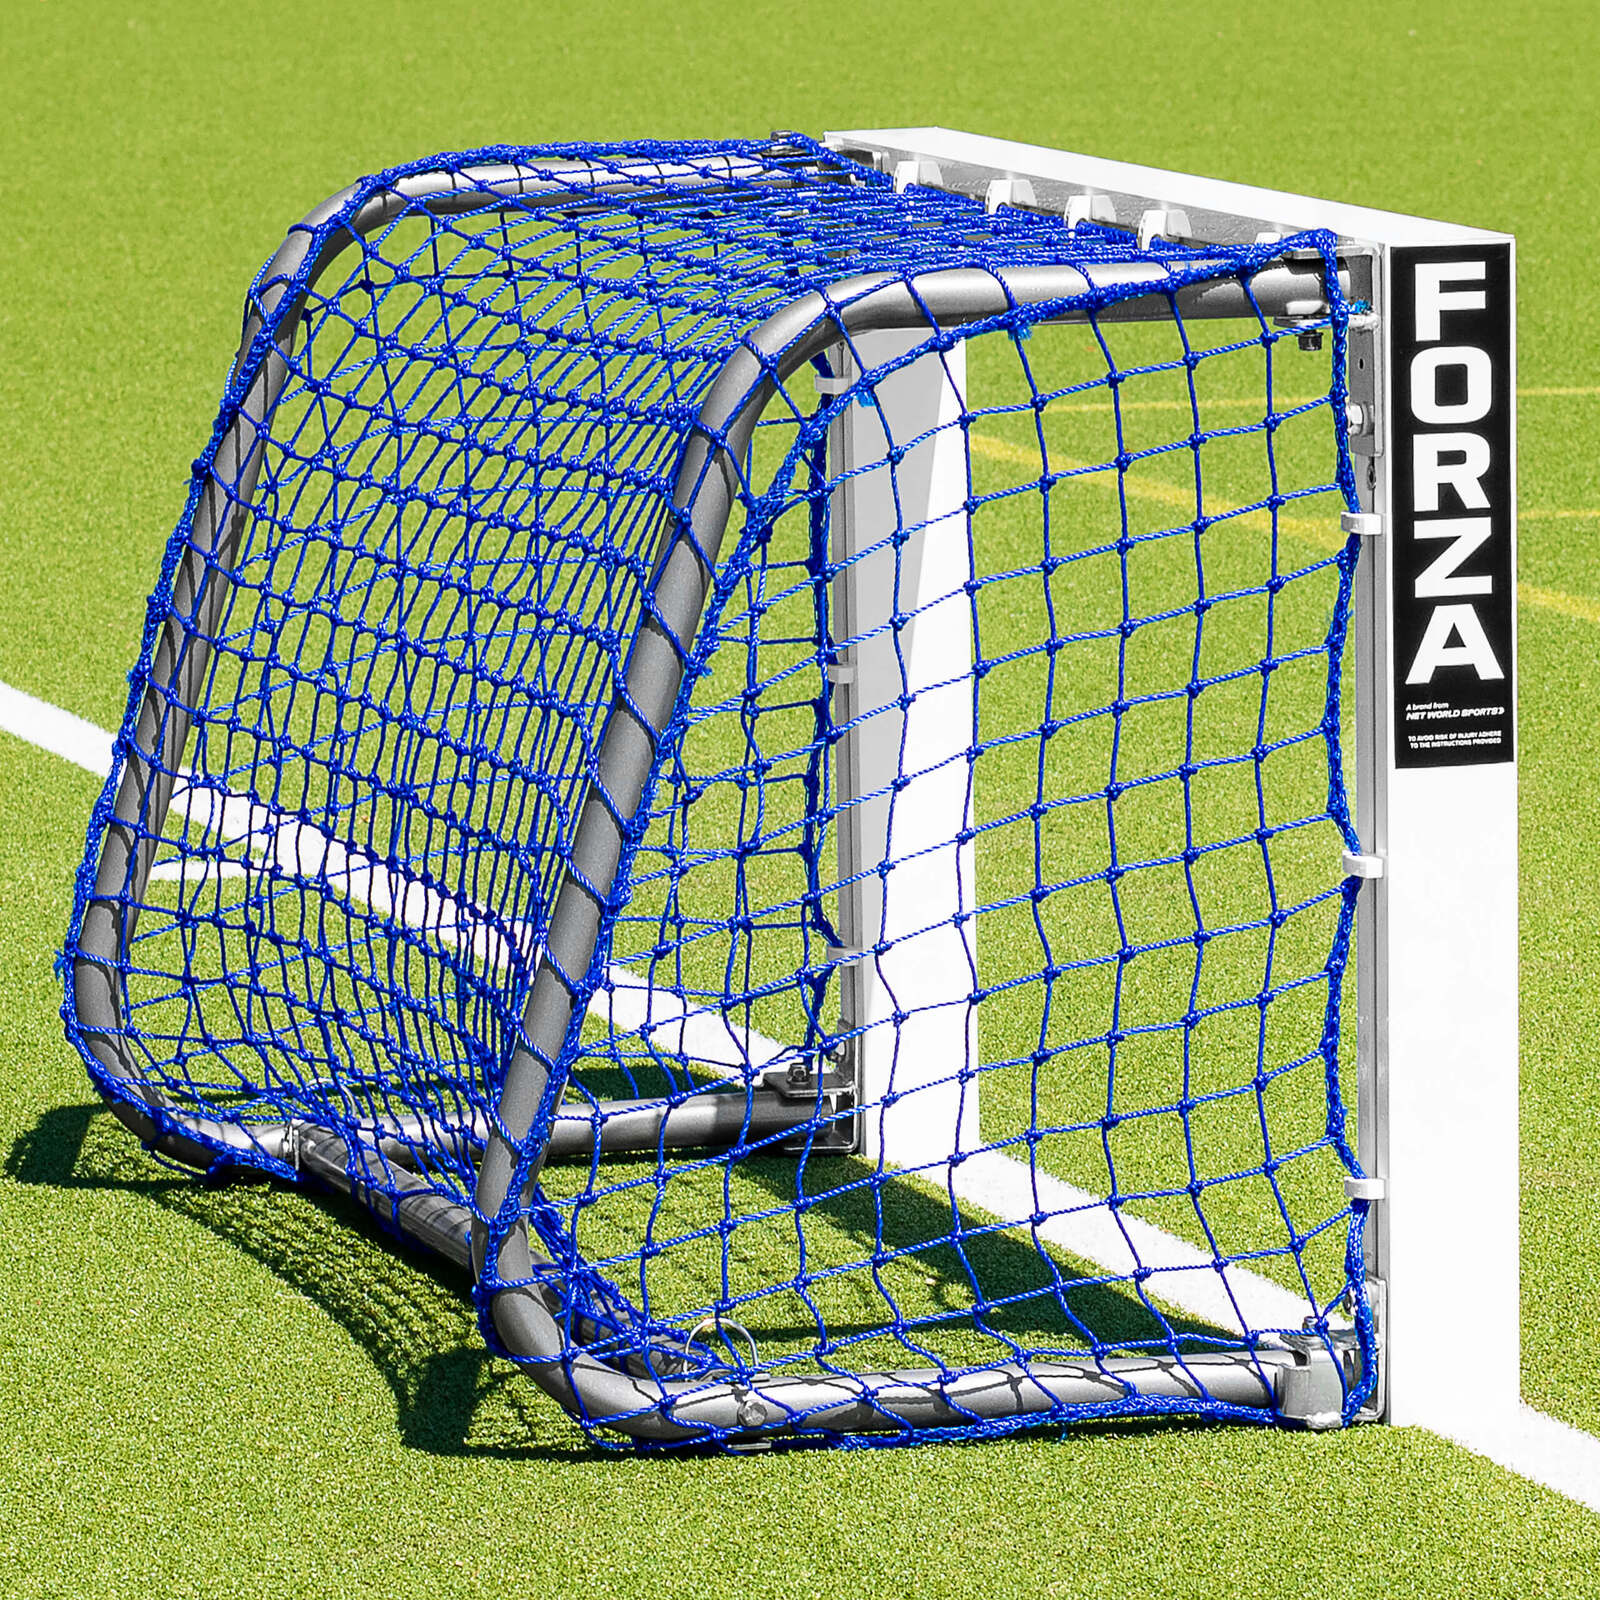 Mini football goals with net use for training, dimension 0.9m x 0.6m